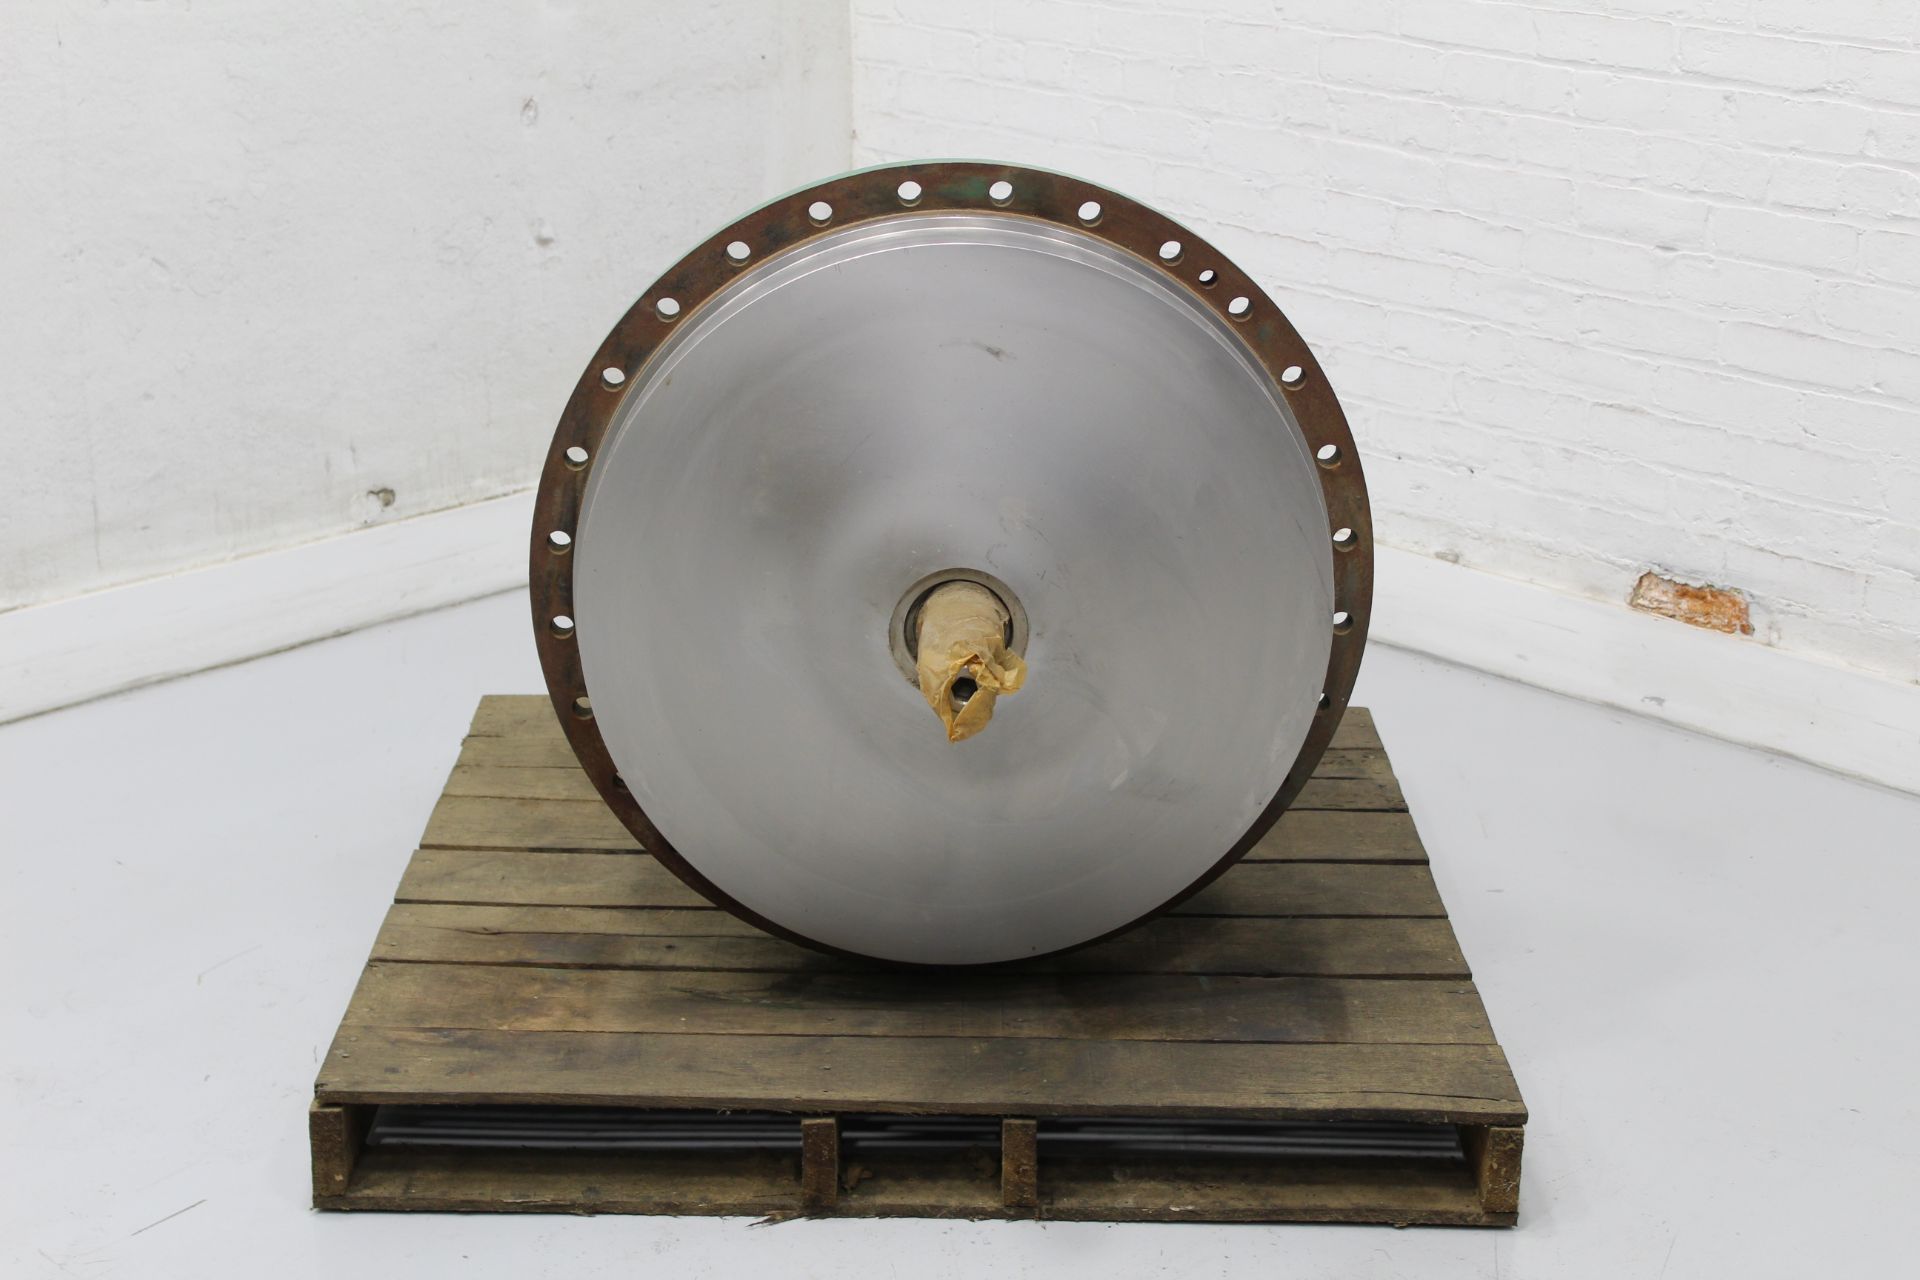 SULZER APT61-24 PUMP POWER END, WITH 28" DIAMETER STUFFING BOX COVER, PACKING (42968, LOCATED IN